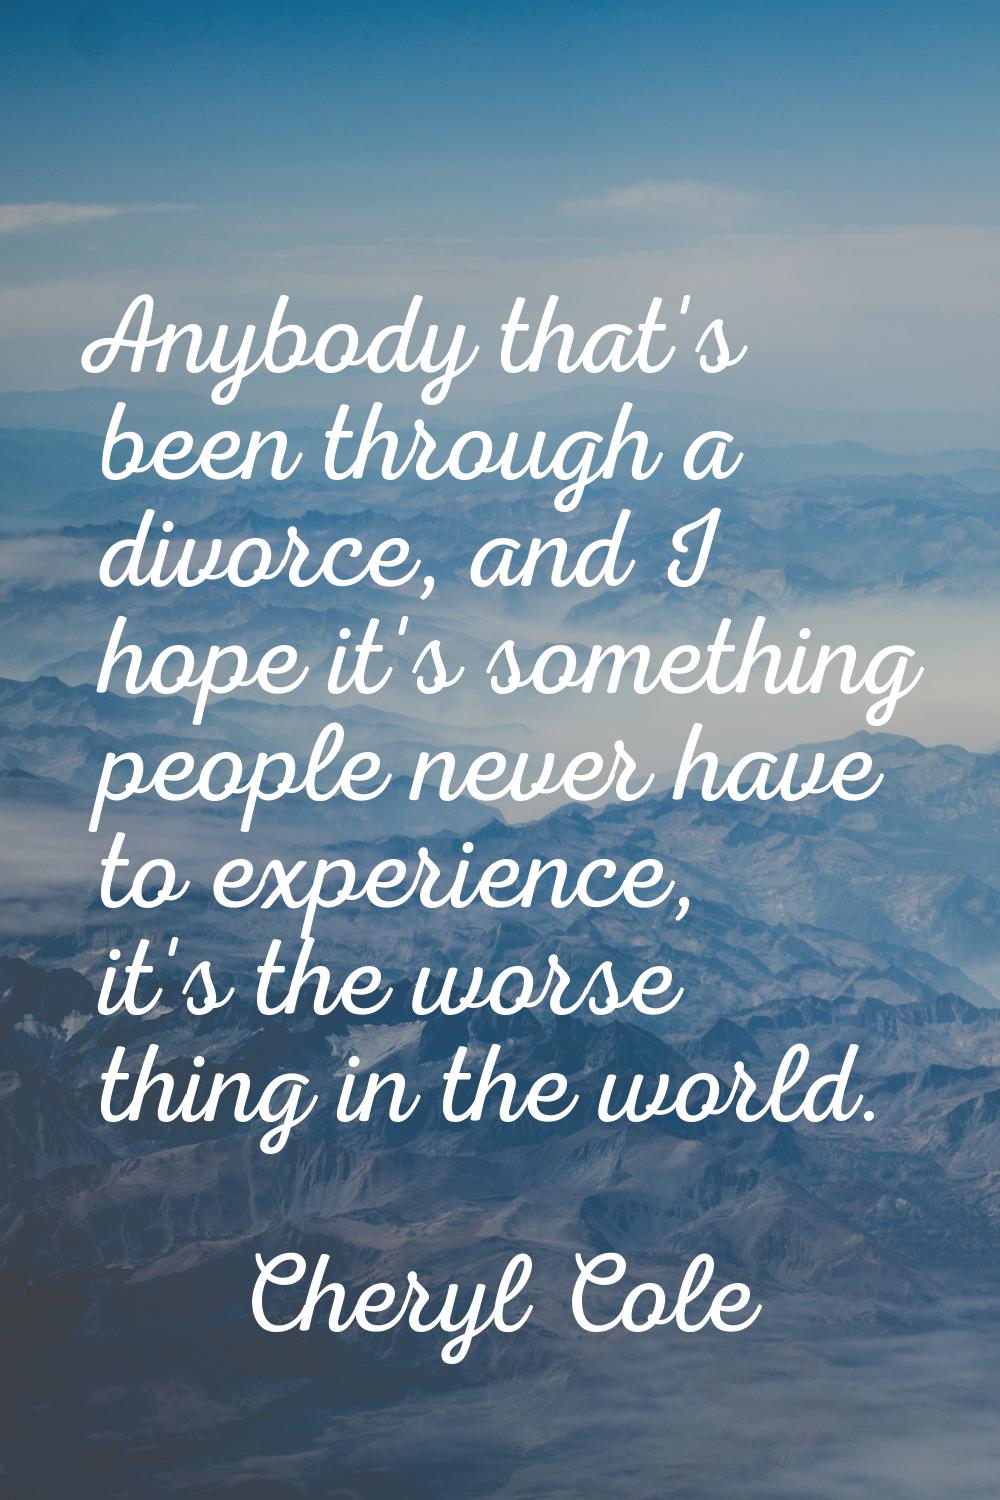 Anybody that's been through a divorce, and I hope it's something people never have to experience, i